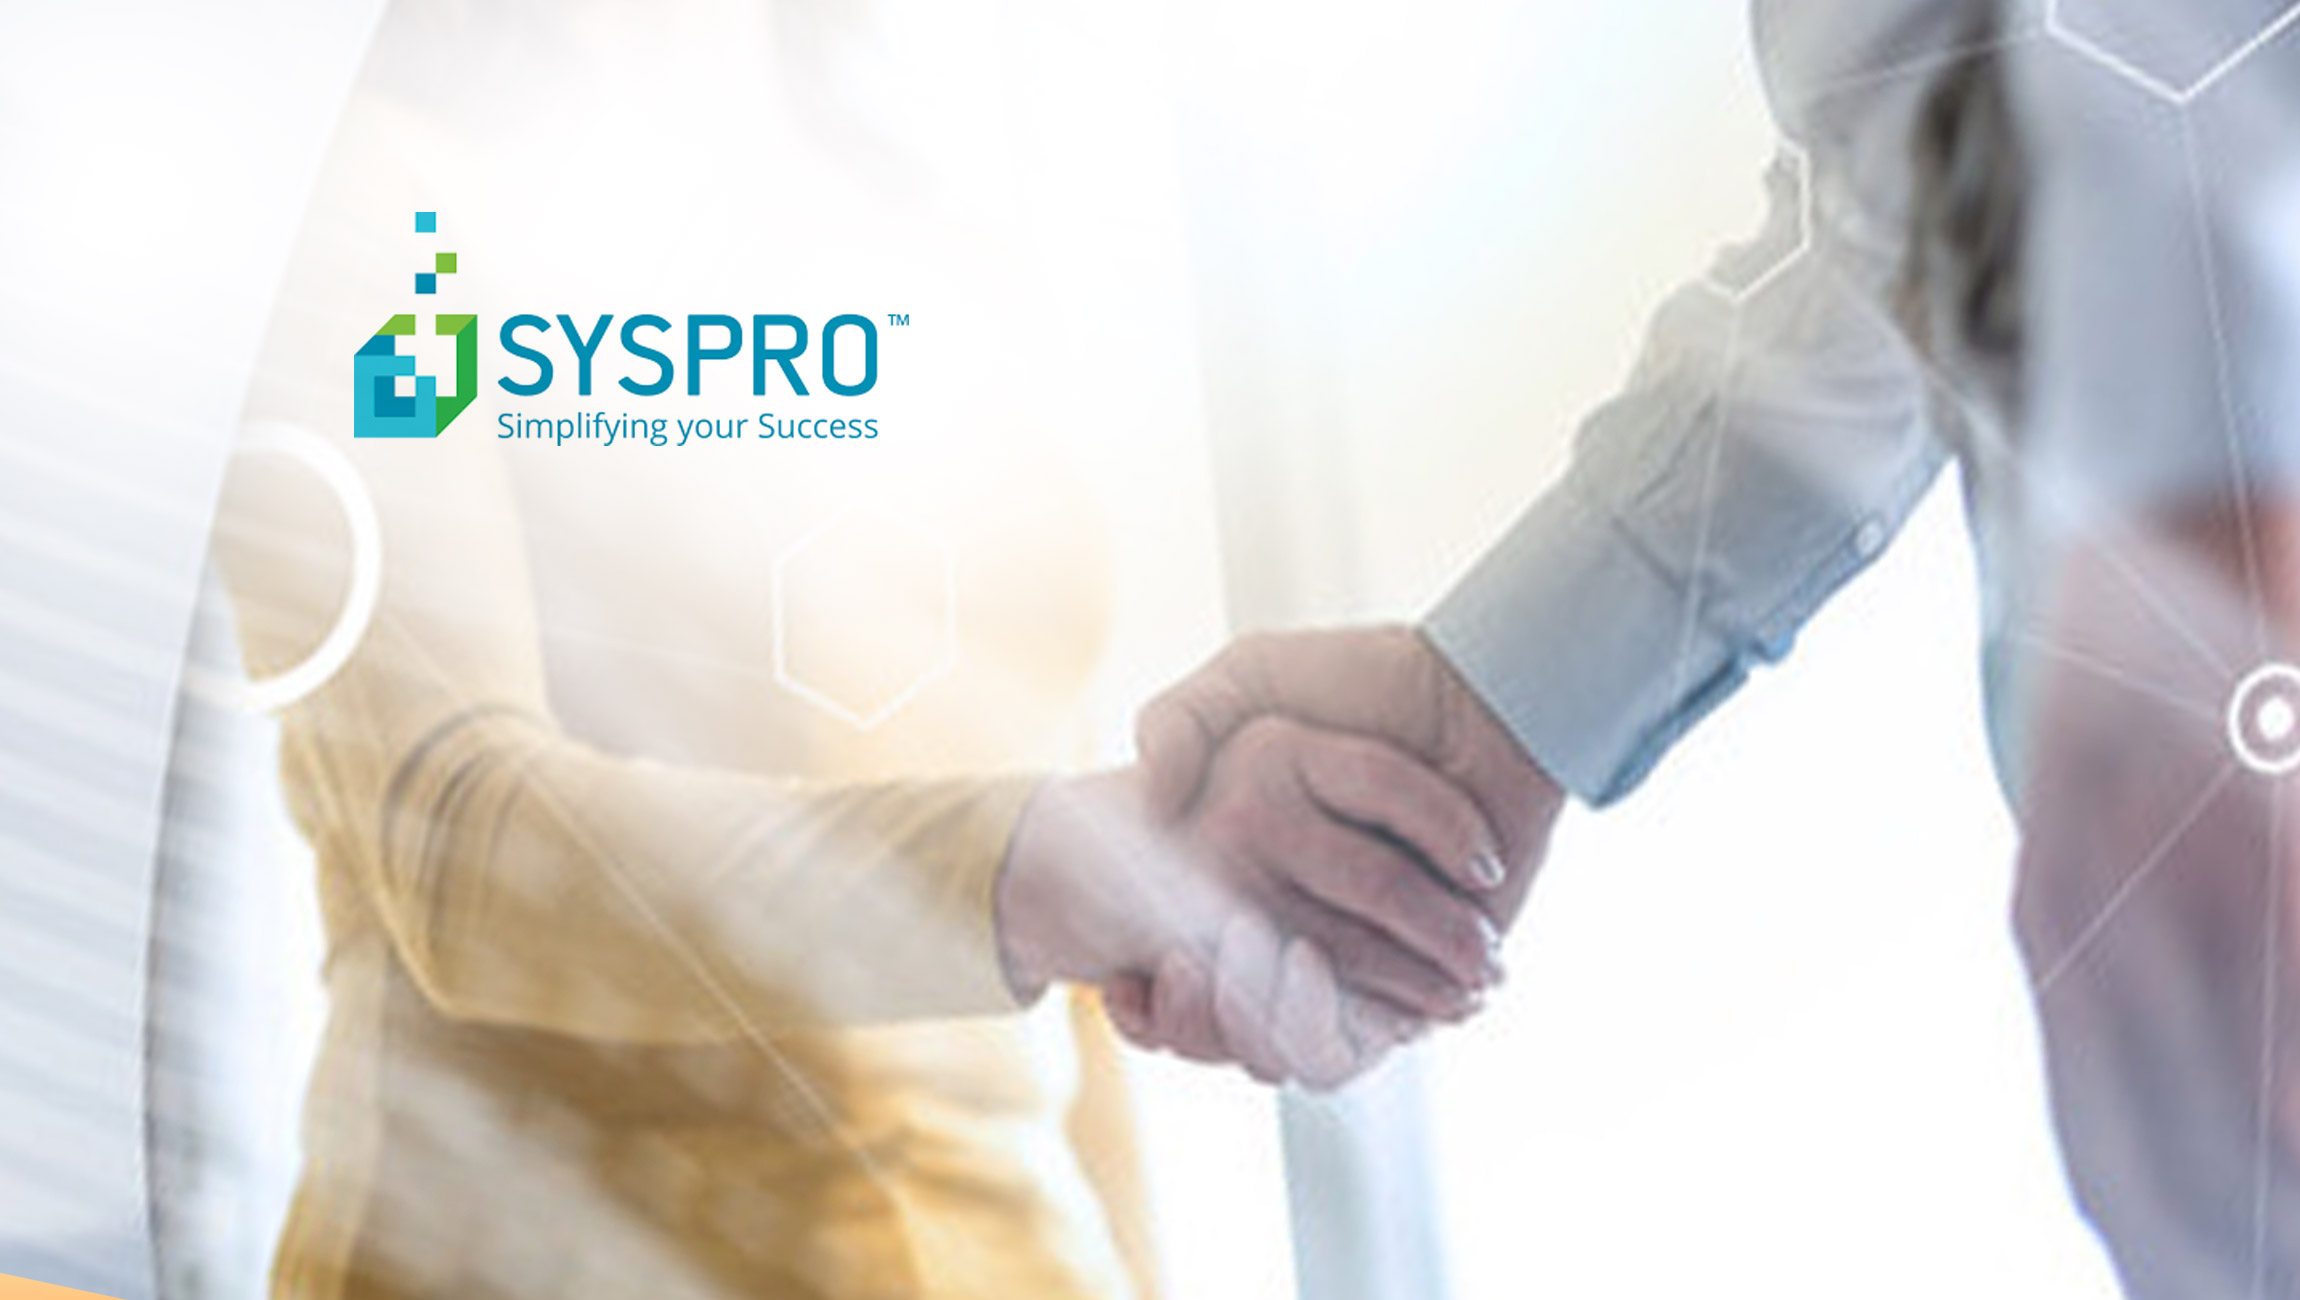 PAL Solutions Named SYSPRO Canada’s Partner of The Year for The Third Consecutive Year